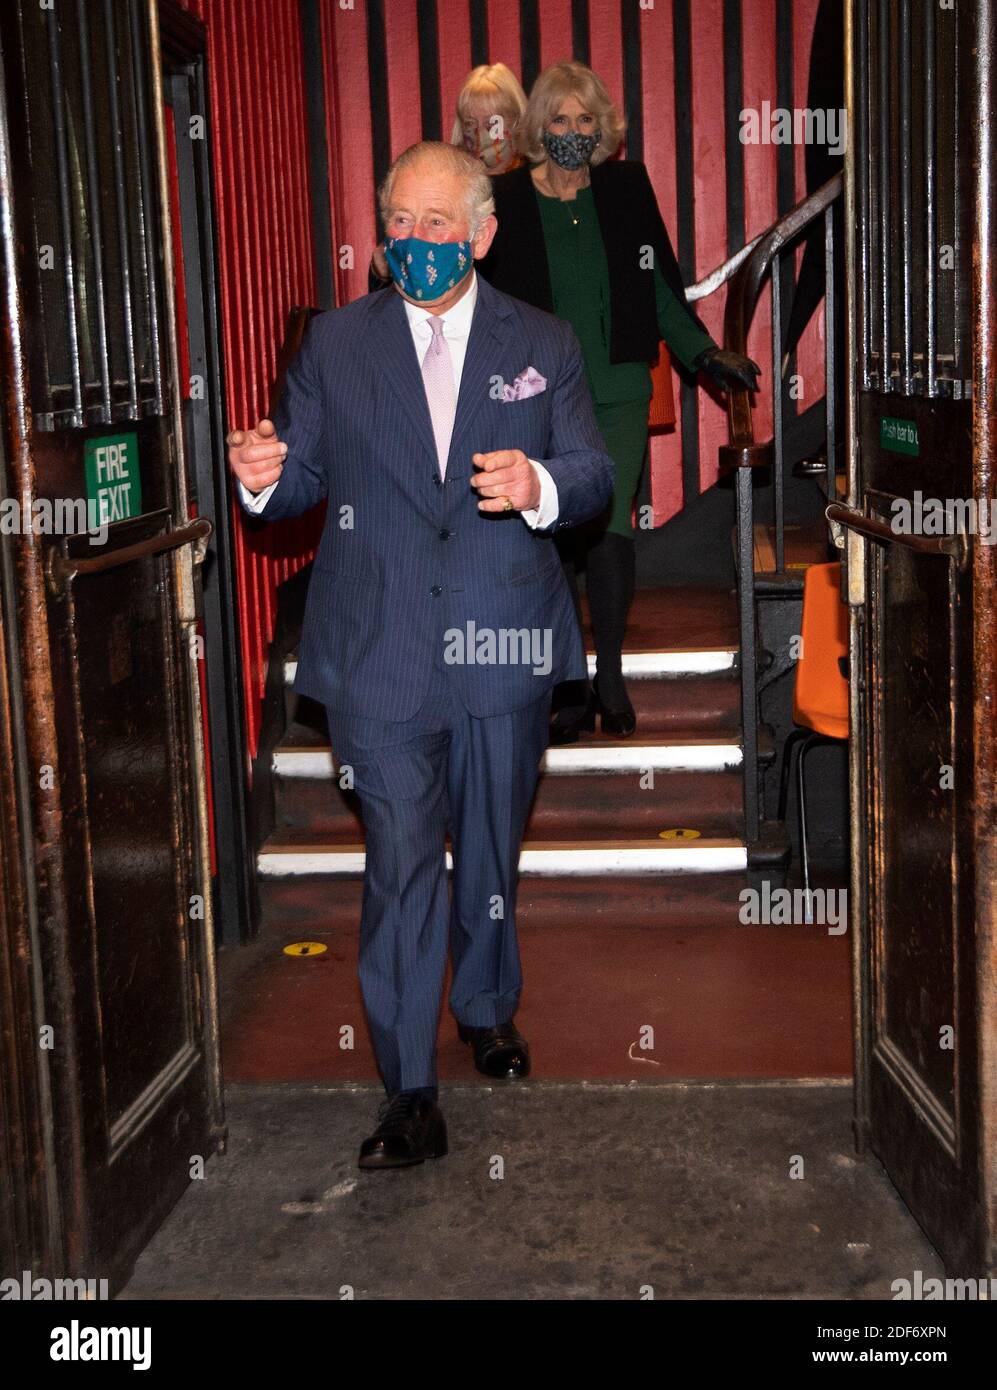 The Prince of Wales and Duchess of Cornwall during a visit to the 100 Club nightclub in London. Stock Photo